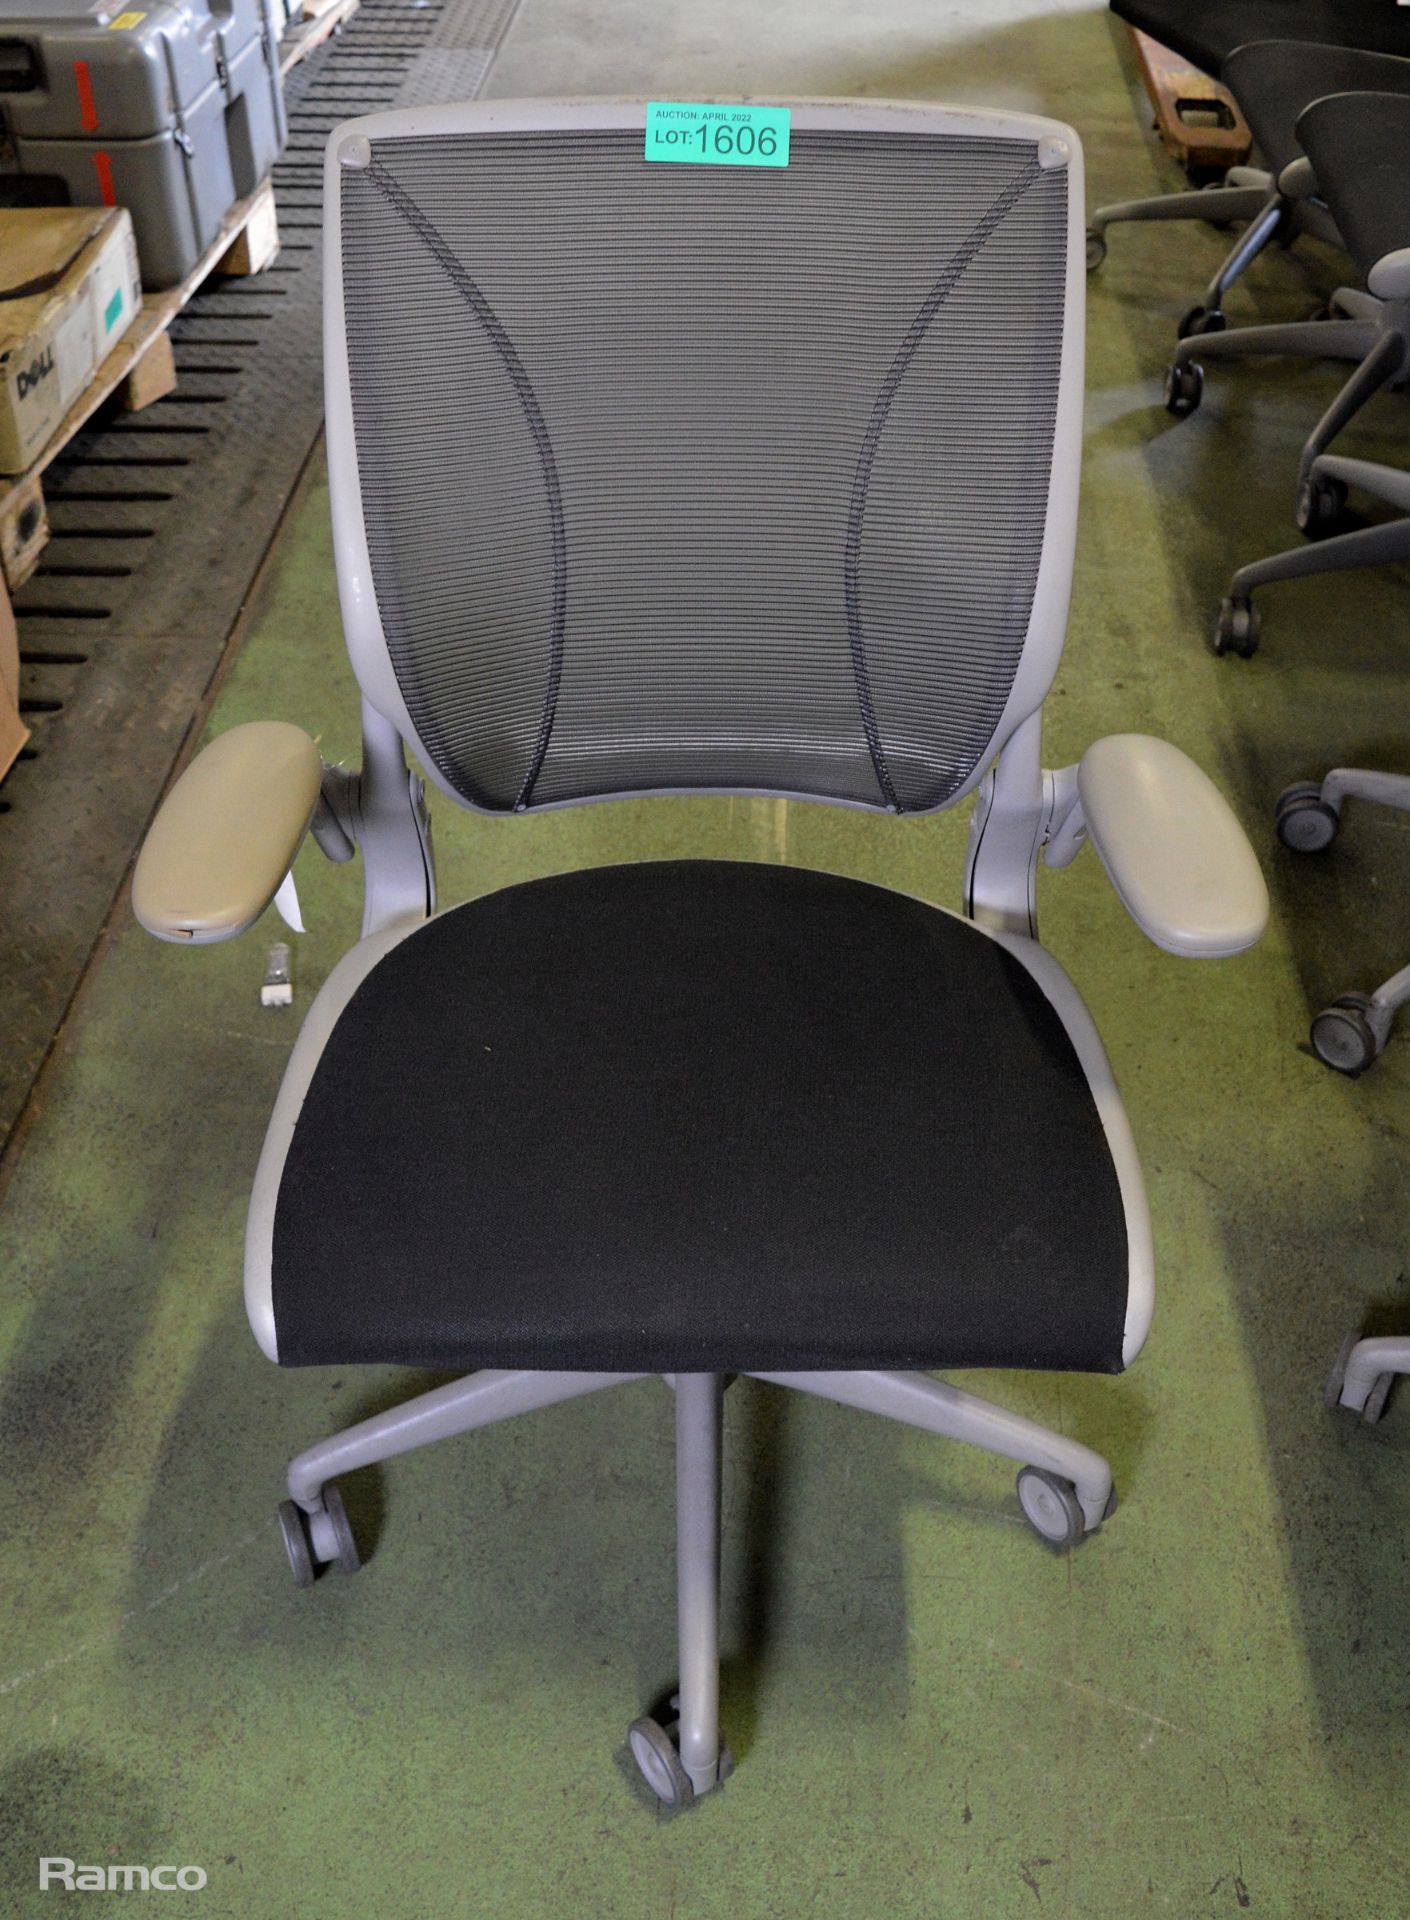 HumanScale Ergonomic Office Chair - grey - Image 3 of 3